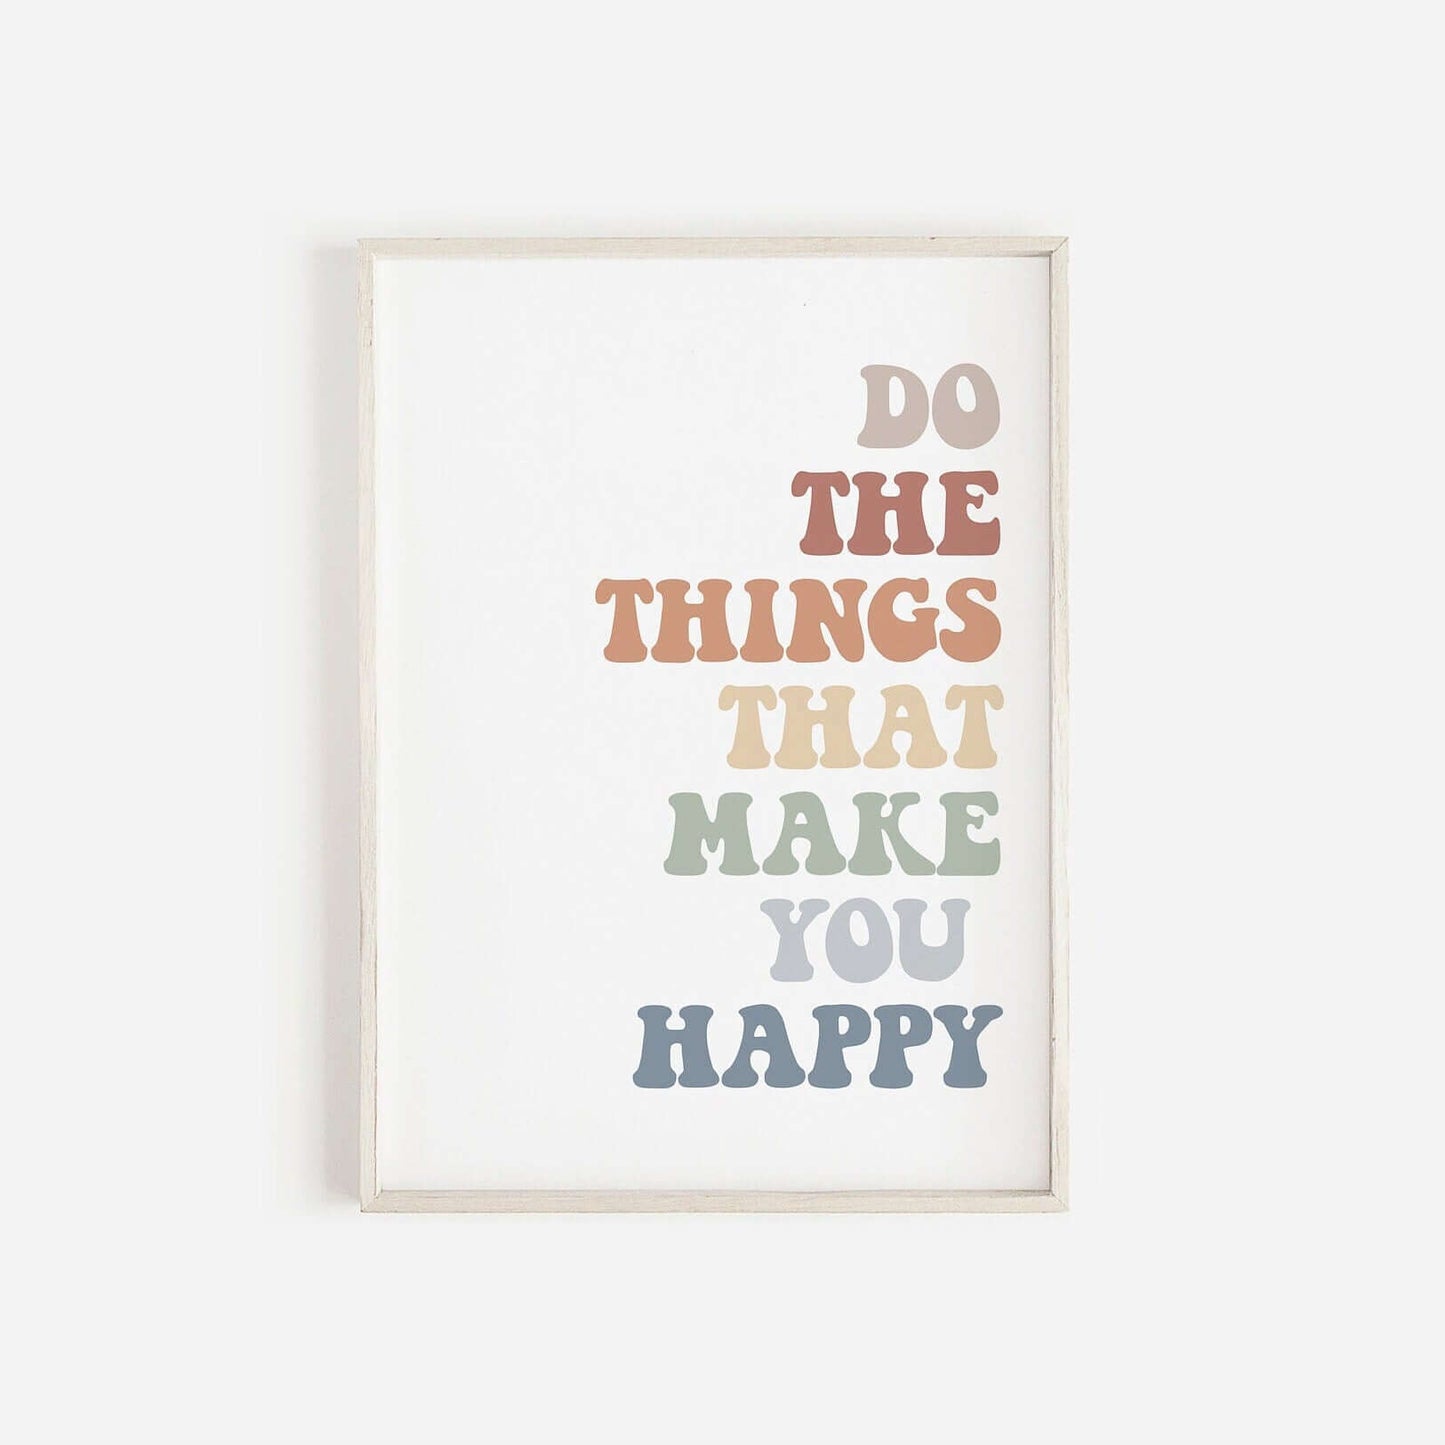 Happiness Quote Print, Do The Things That Make You Happy, Home Decor, Kids Wall Decor, Nursery Prints, Positive Quote, Motivational Quote,